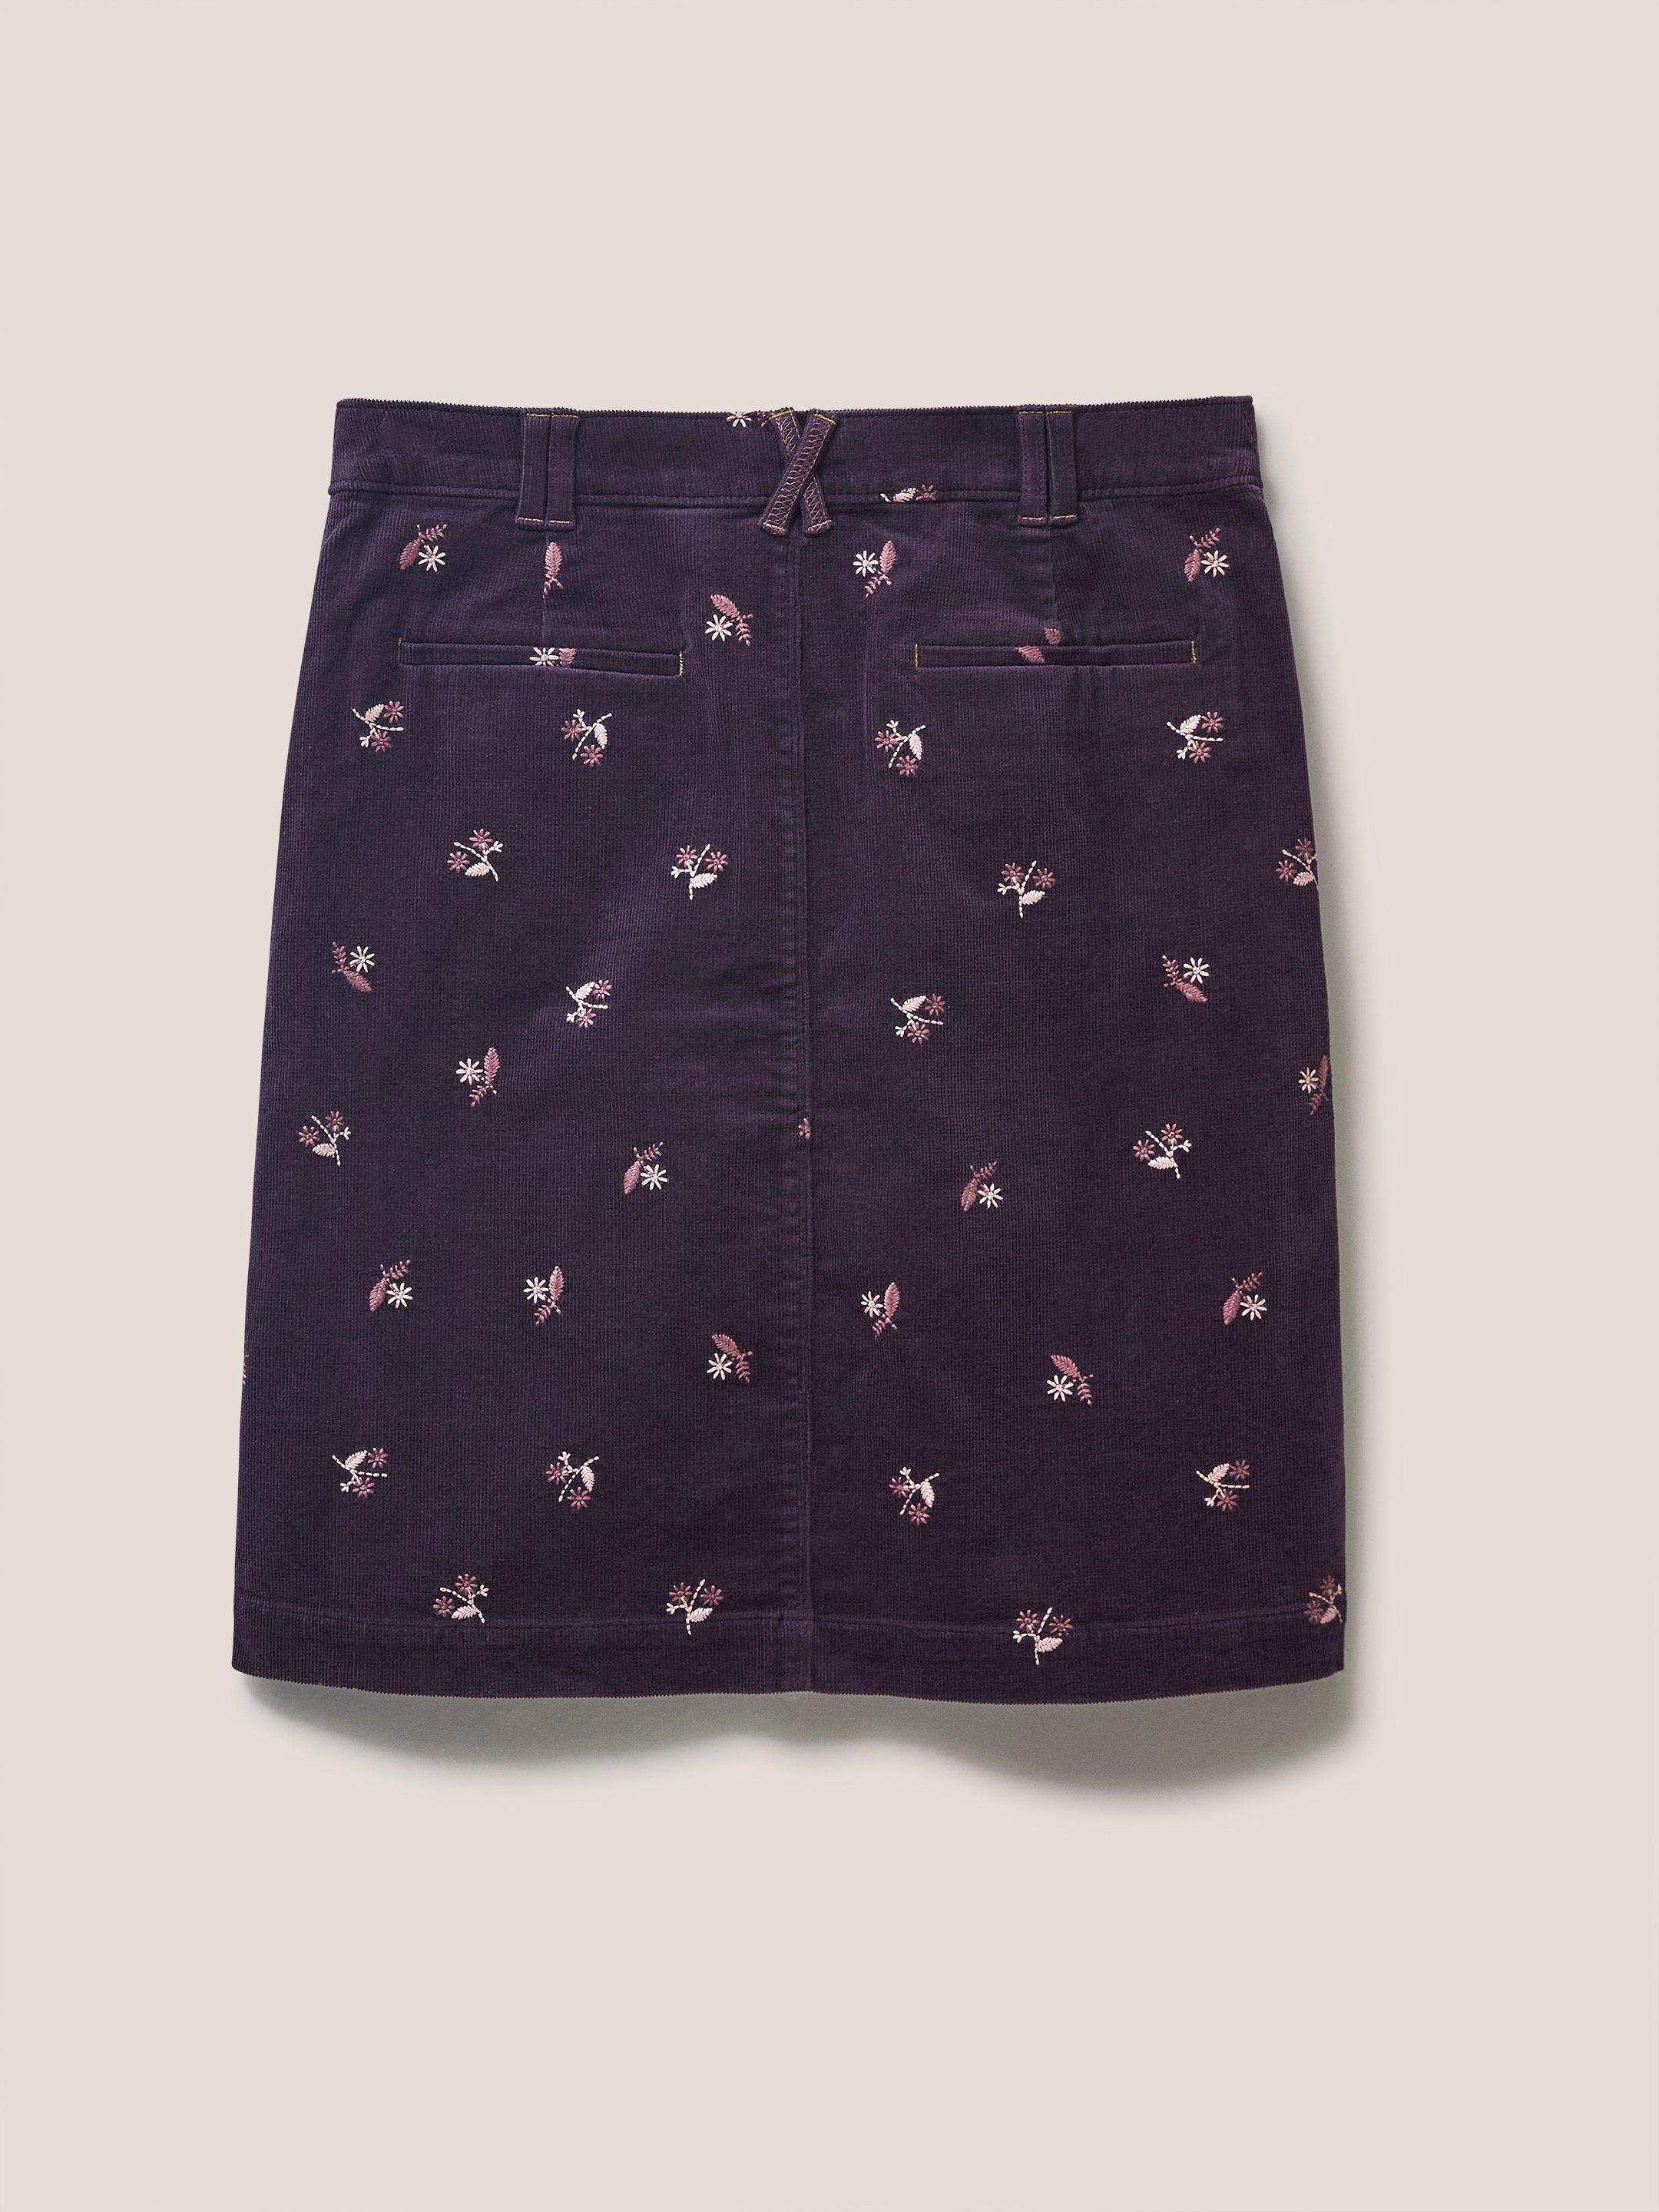 Melody Cord Skirt in PURPLE MLT - FLAT BACK